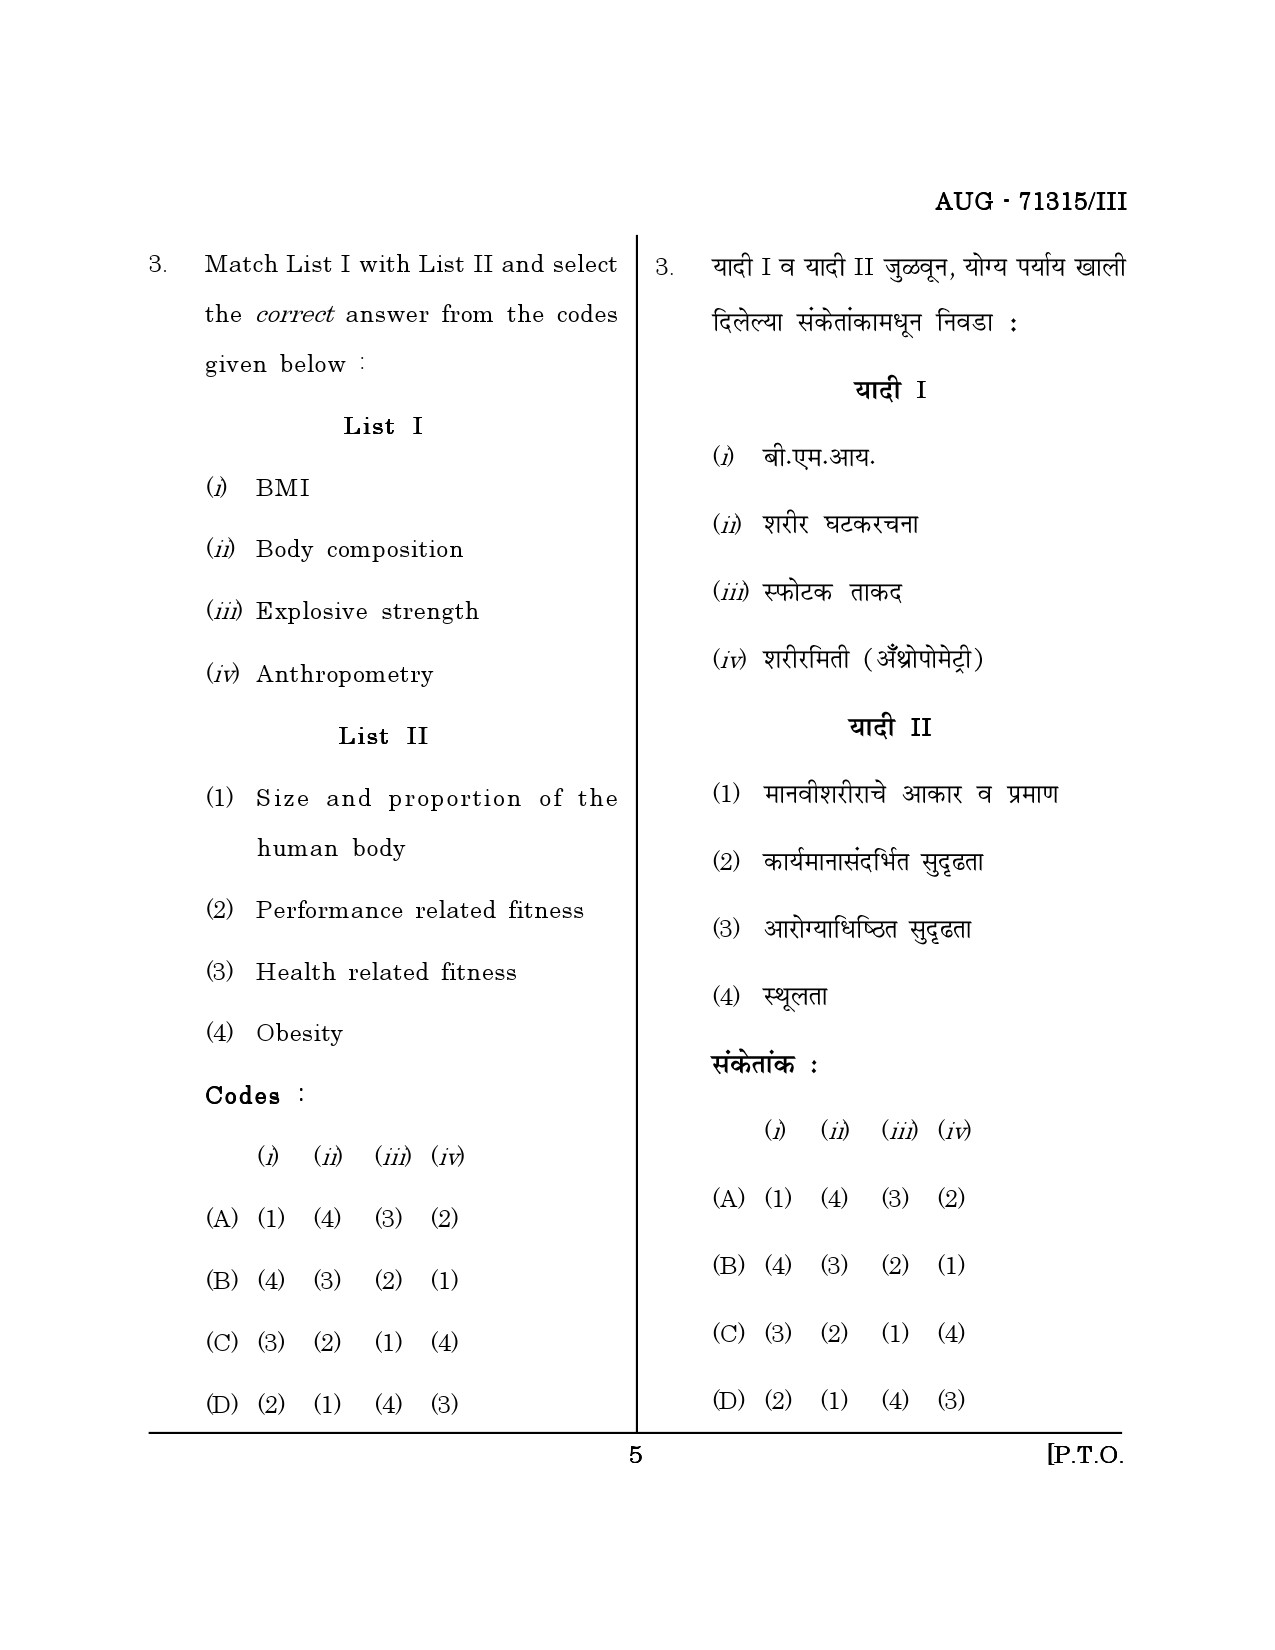 Maharashtra SET Physical Education Question Paper III August 2015 4